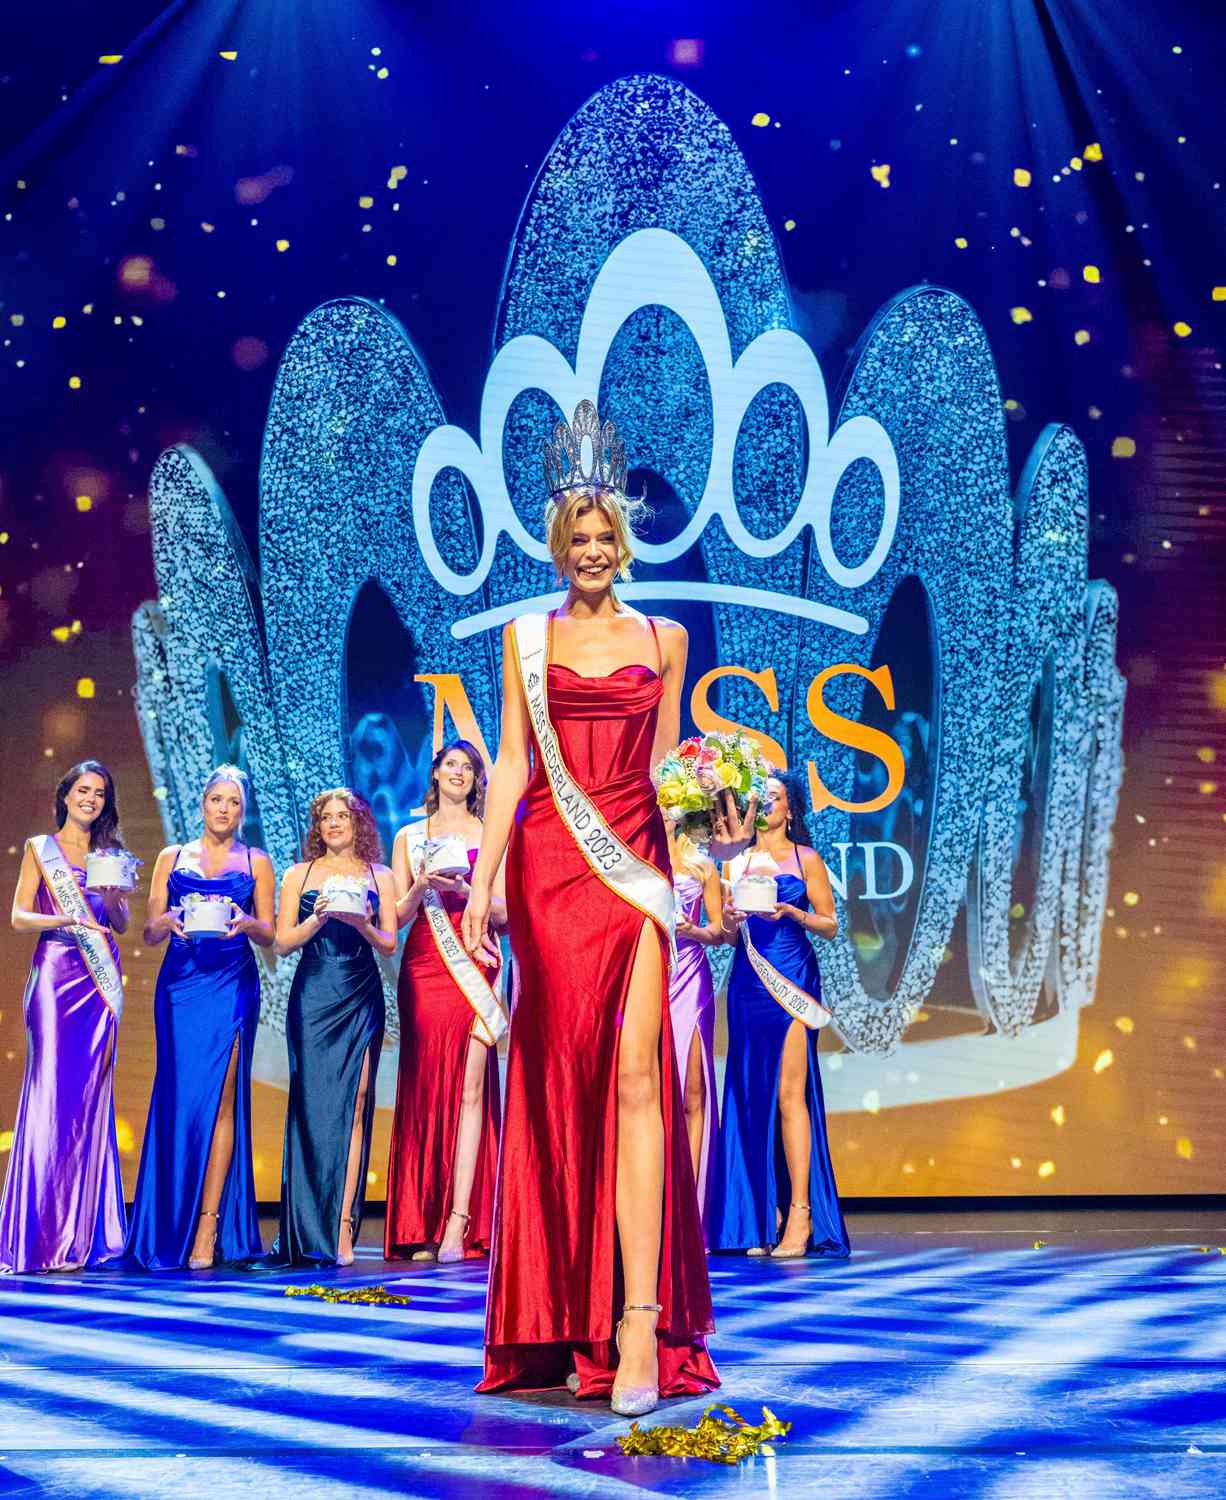 Rikkie Kolle (Miss Netherlands 2023) at the final of Miss Netherlands 2023